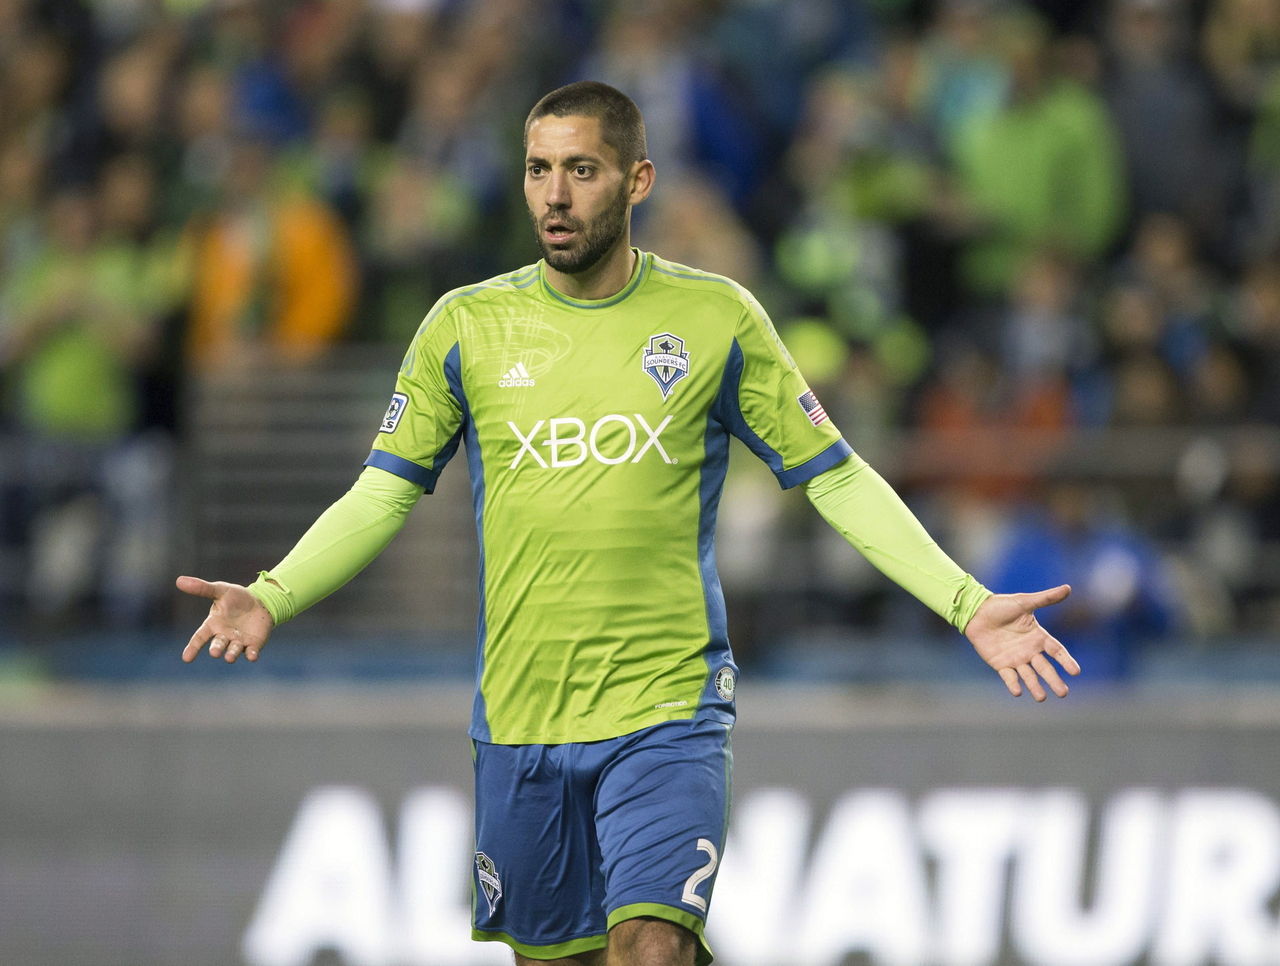 Obafemi Martins, Clint Dempsey lead Sounders in rout over Revs - SBI Soccer